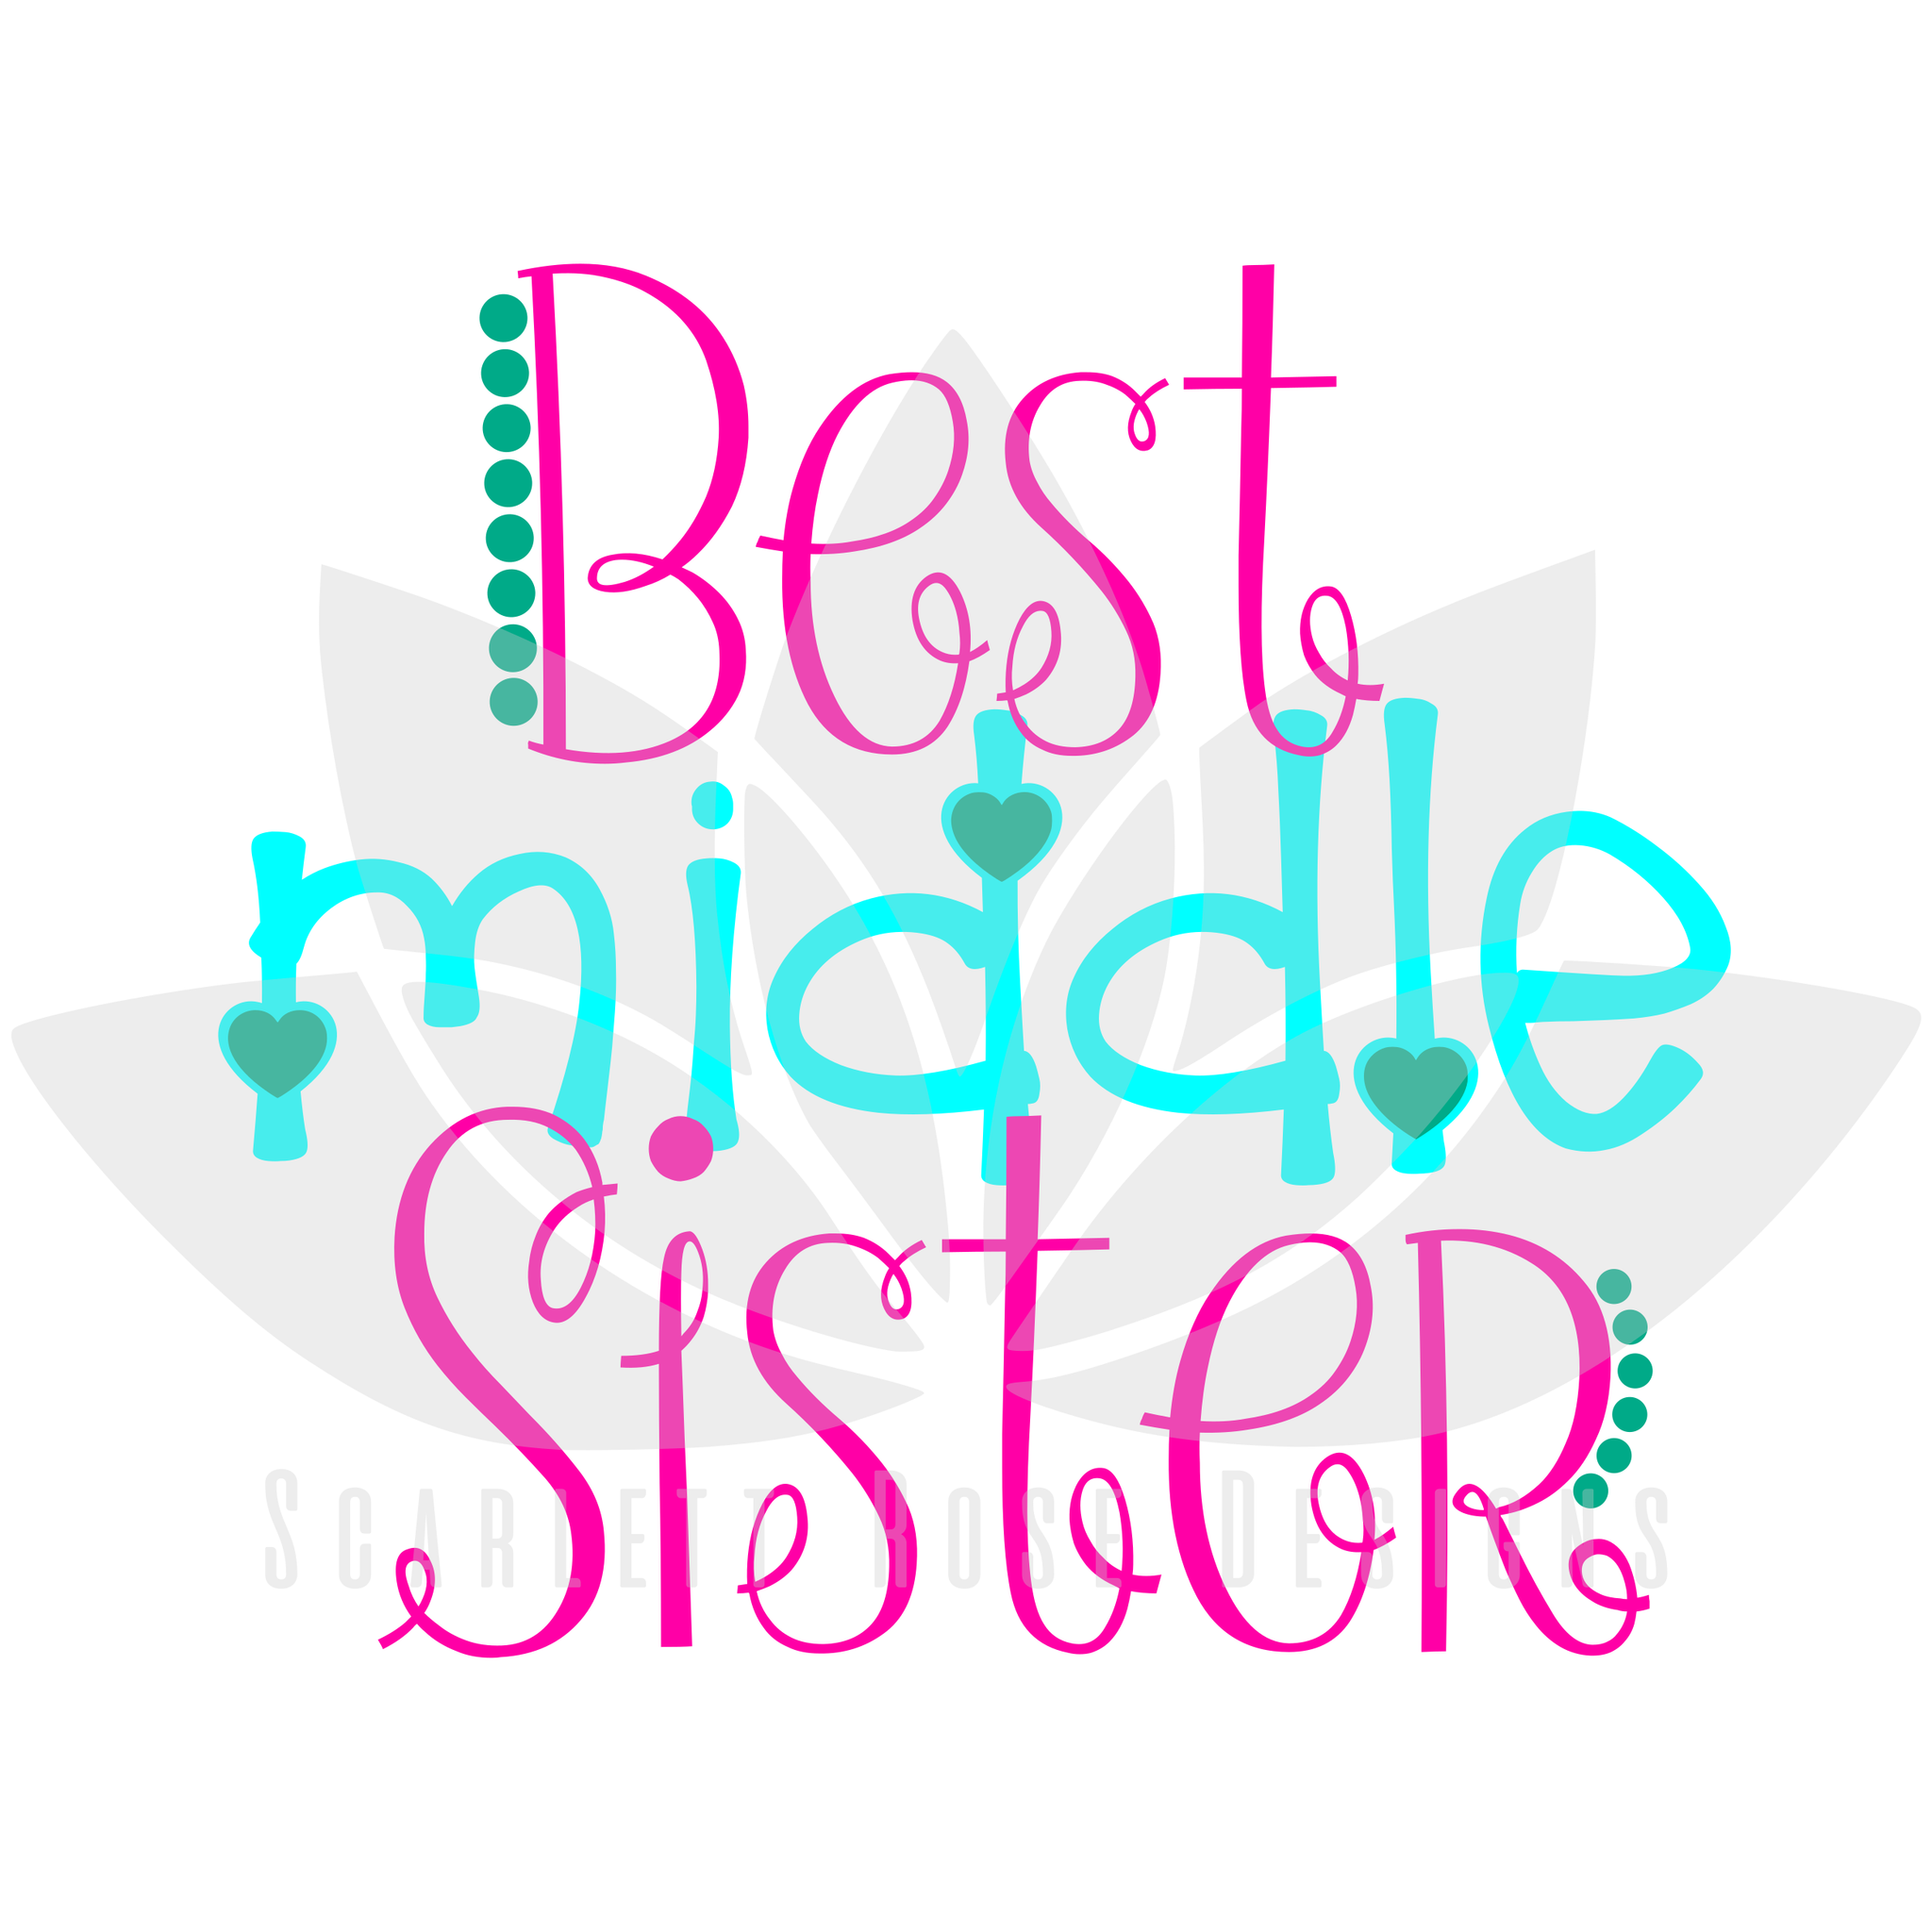 Download New Best Middle Sister Svg Cut File New Baby Announcement Scarlett Rose Designs